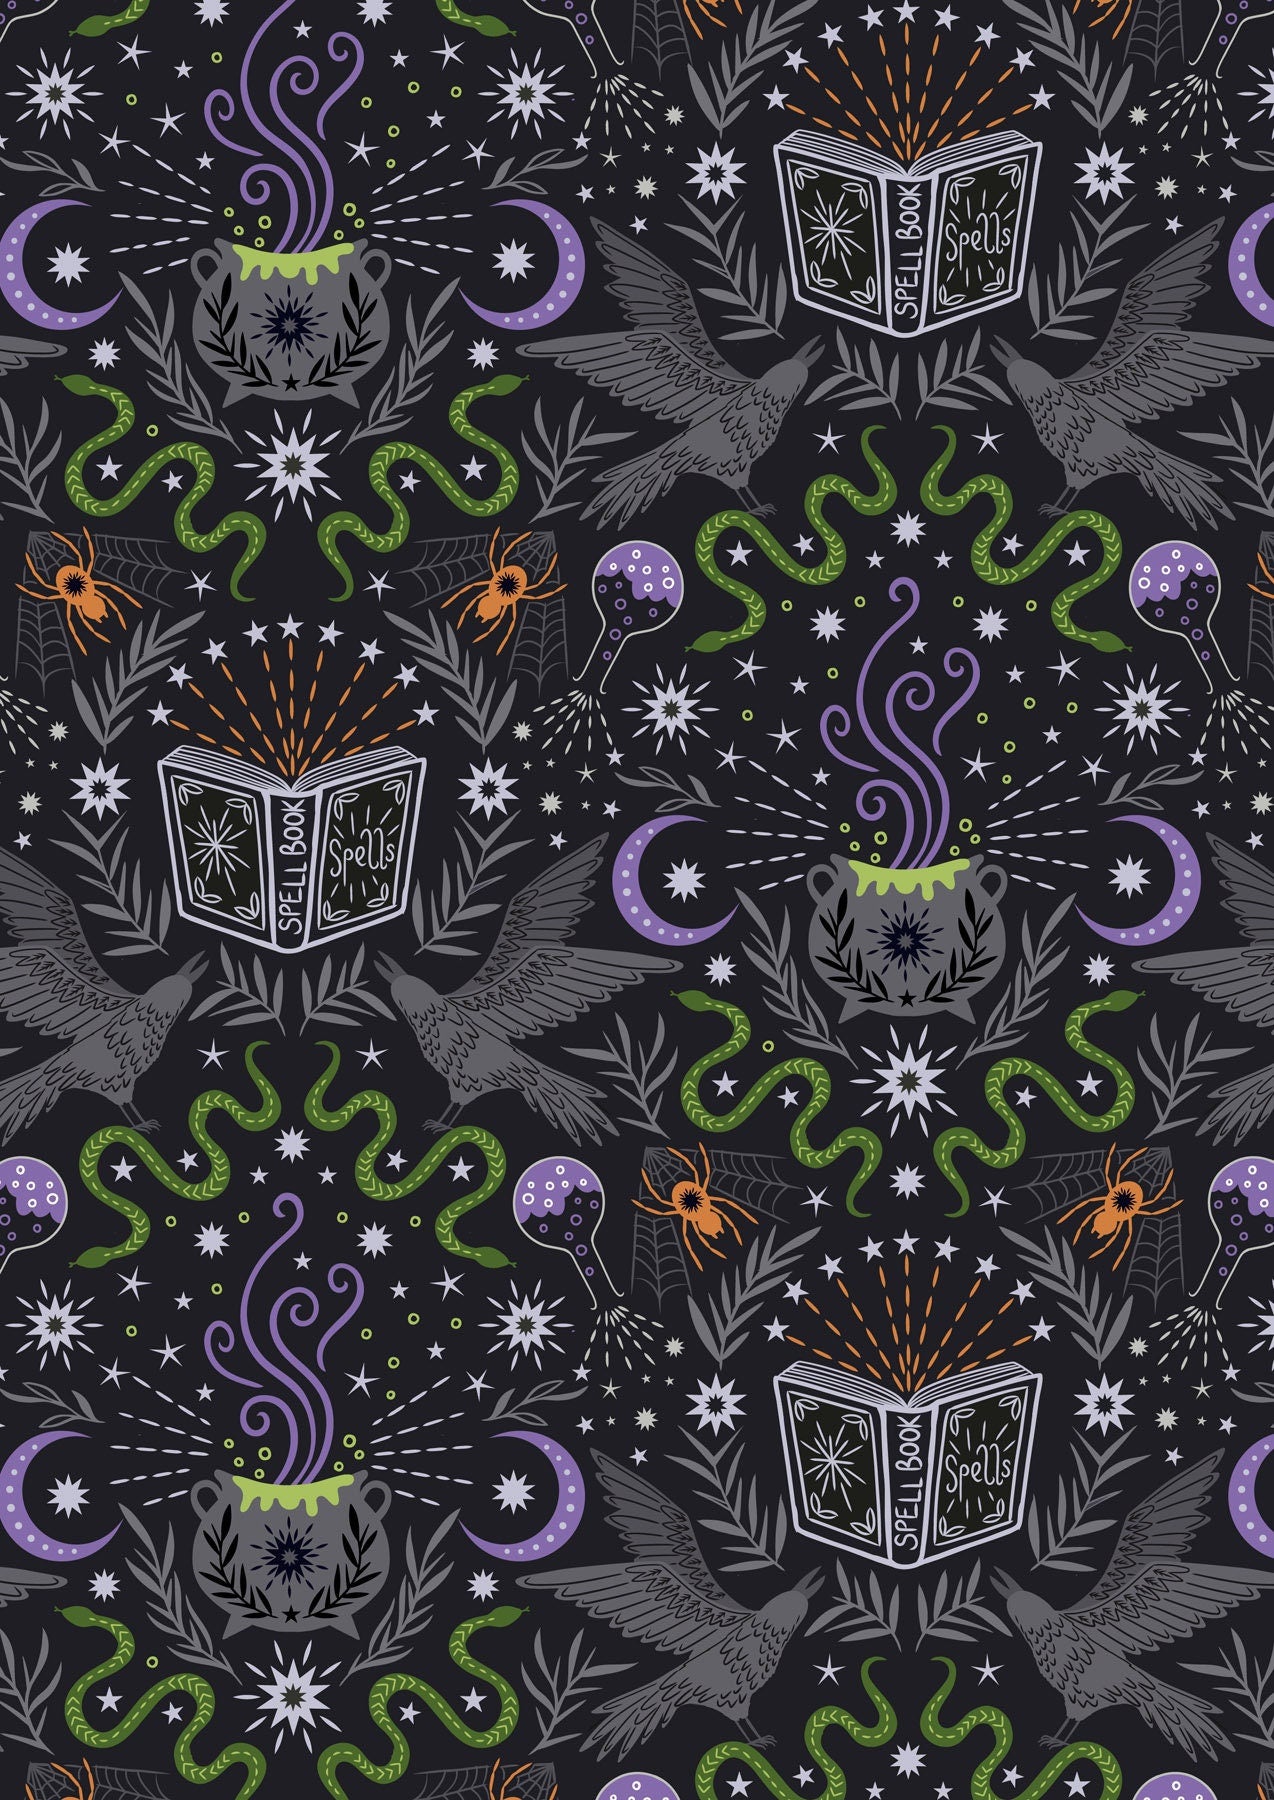 Cast A Spell, on Black (silver metallic), A719.3, Lewis & Irene Fabric, Quilt Fabric, Cotton Fabric, Halloween Fabric, Fabric By the Yard